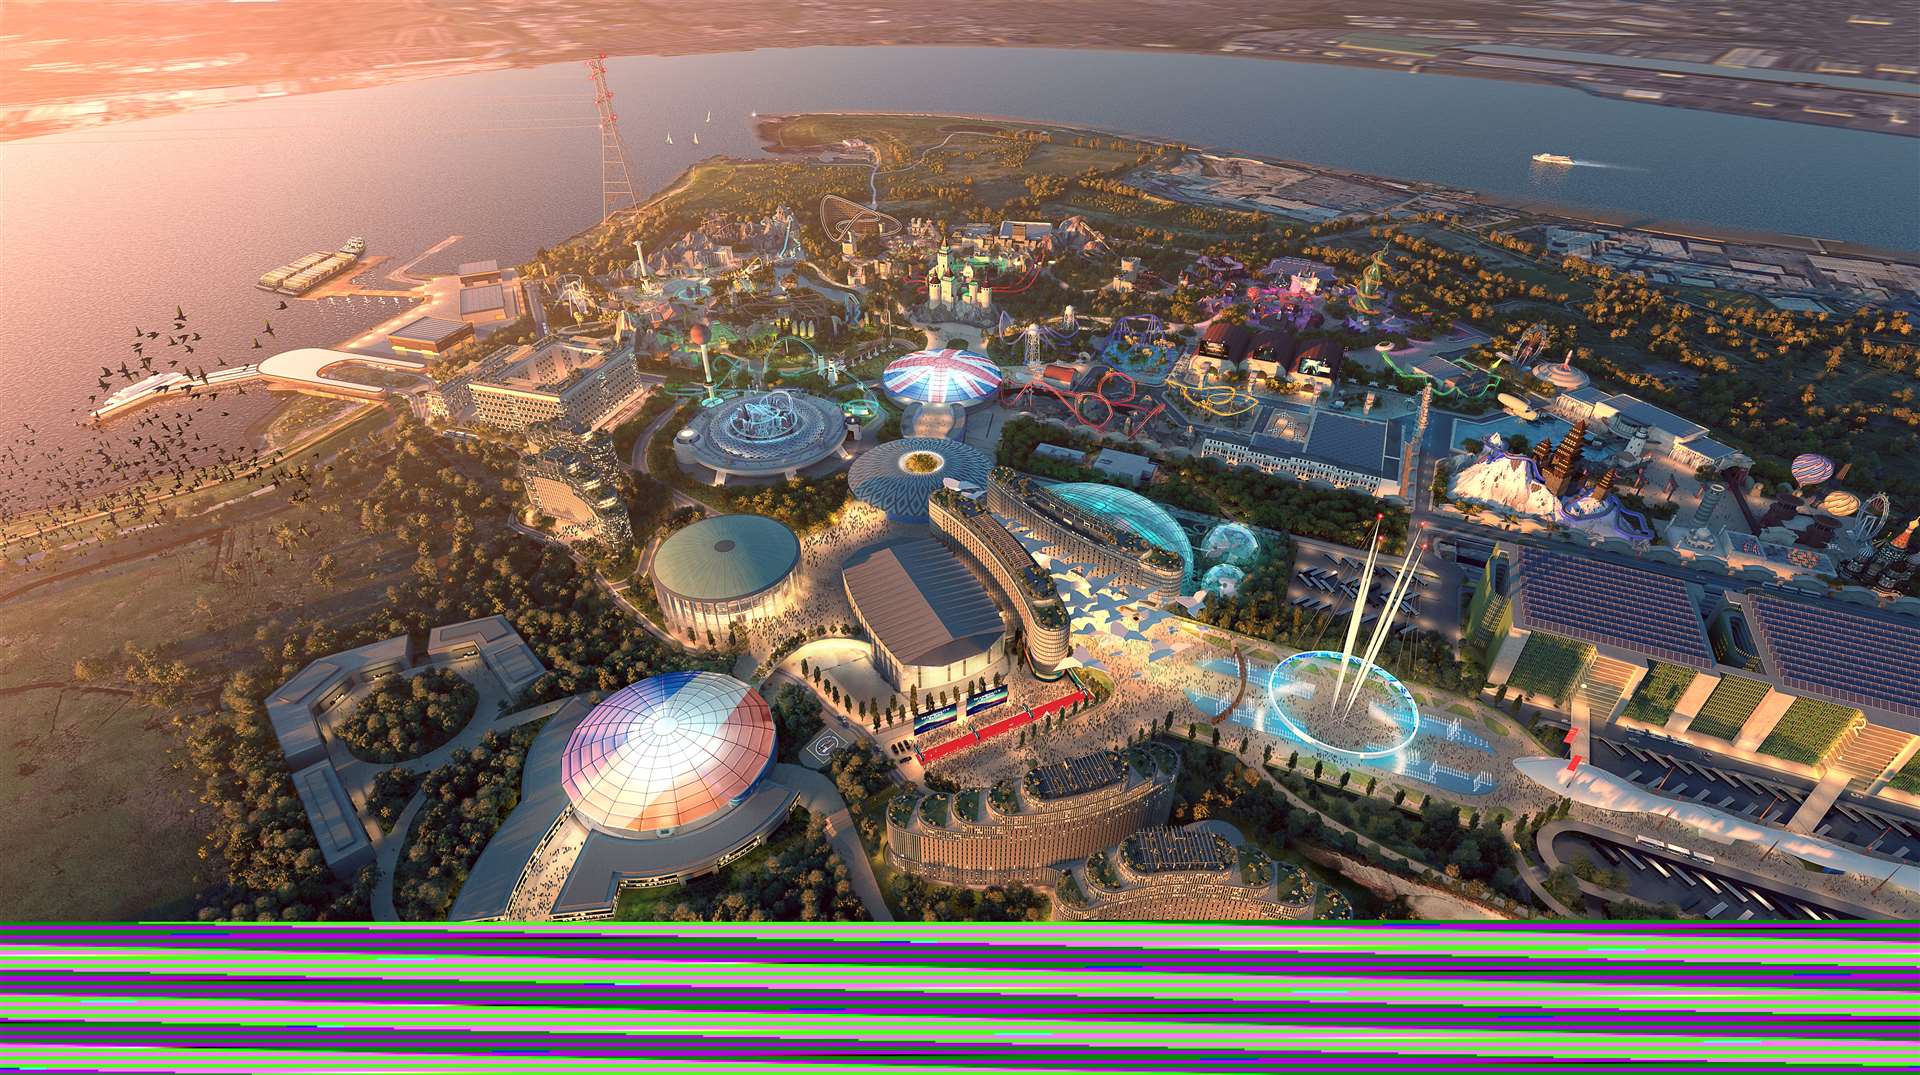 A new detailed impression of what the London Resort theme park will look like if approved